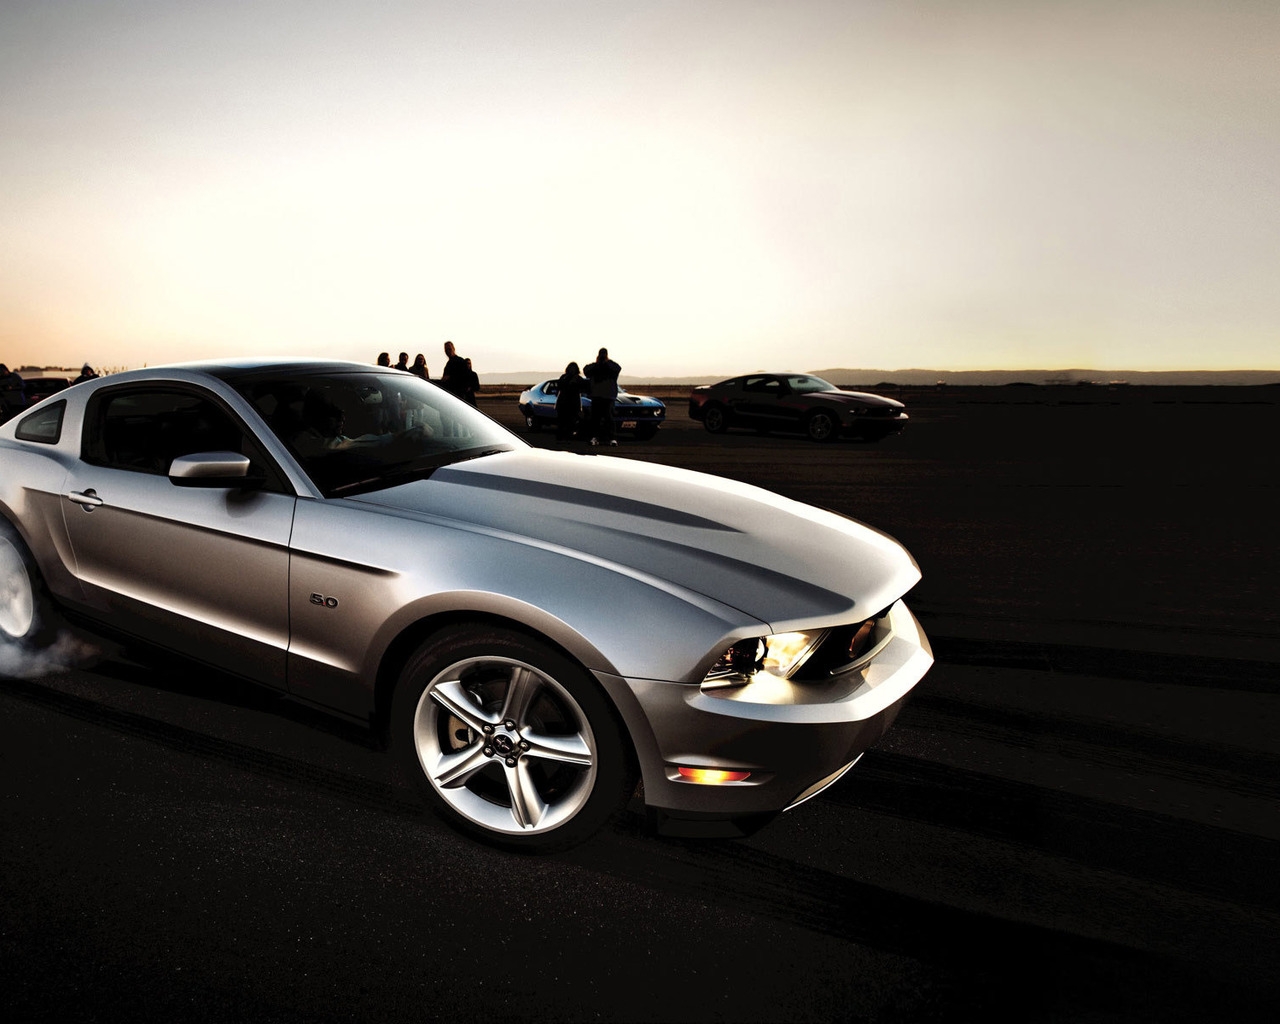 Silver Ford Mustang for 1280 x 1024 resolution